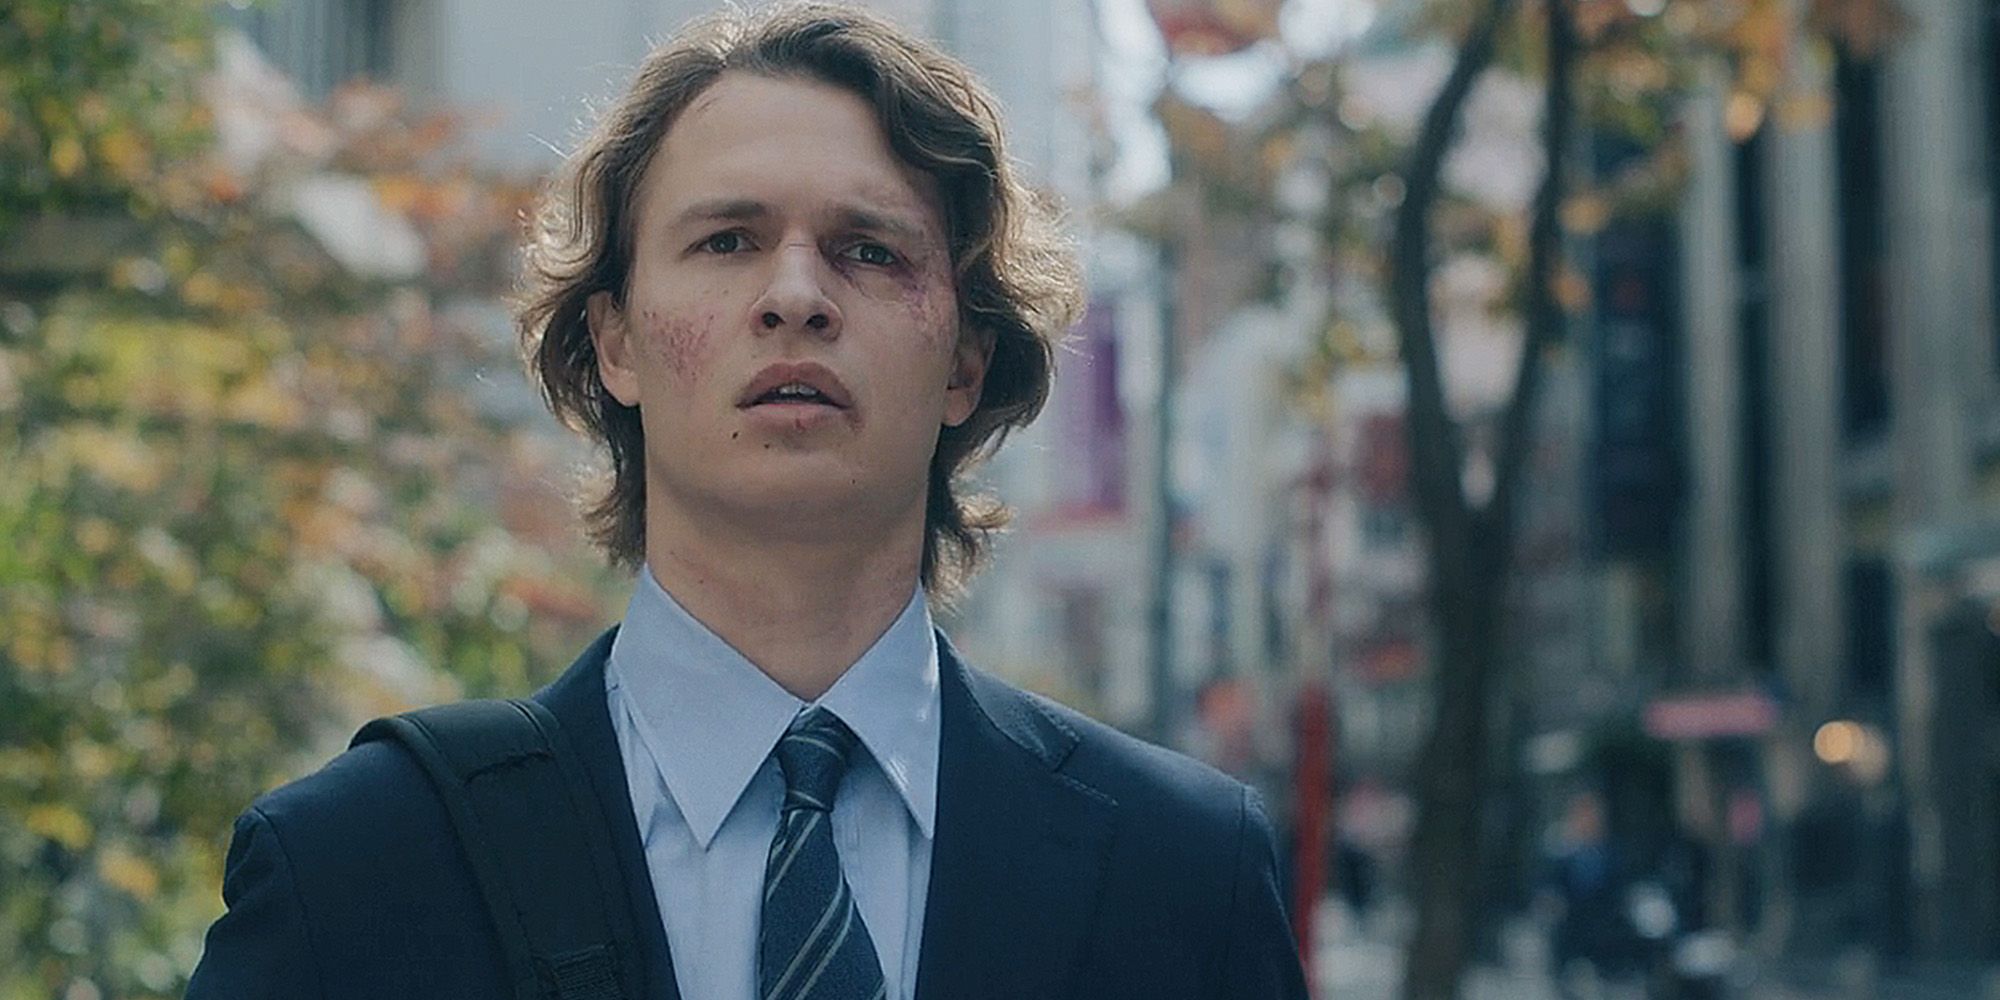 Ansel Elgort as Jake Adelstein with a black eye looking on sadly in Tokyo Vice season 2